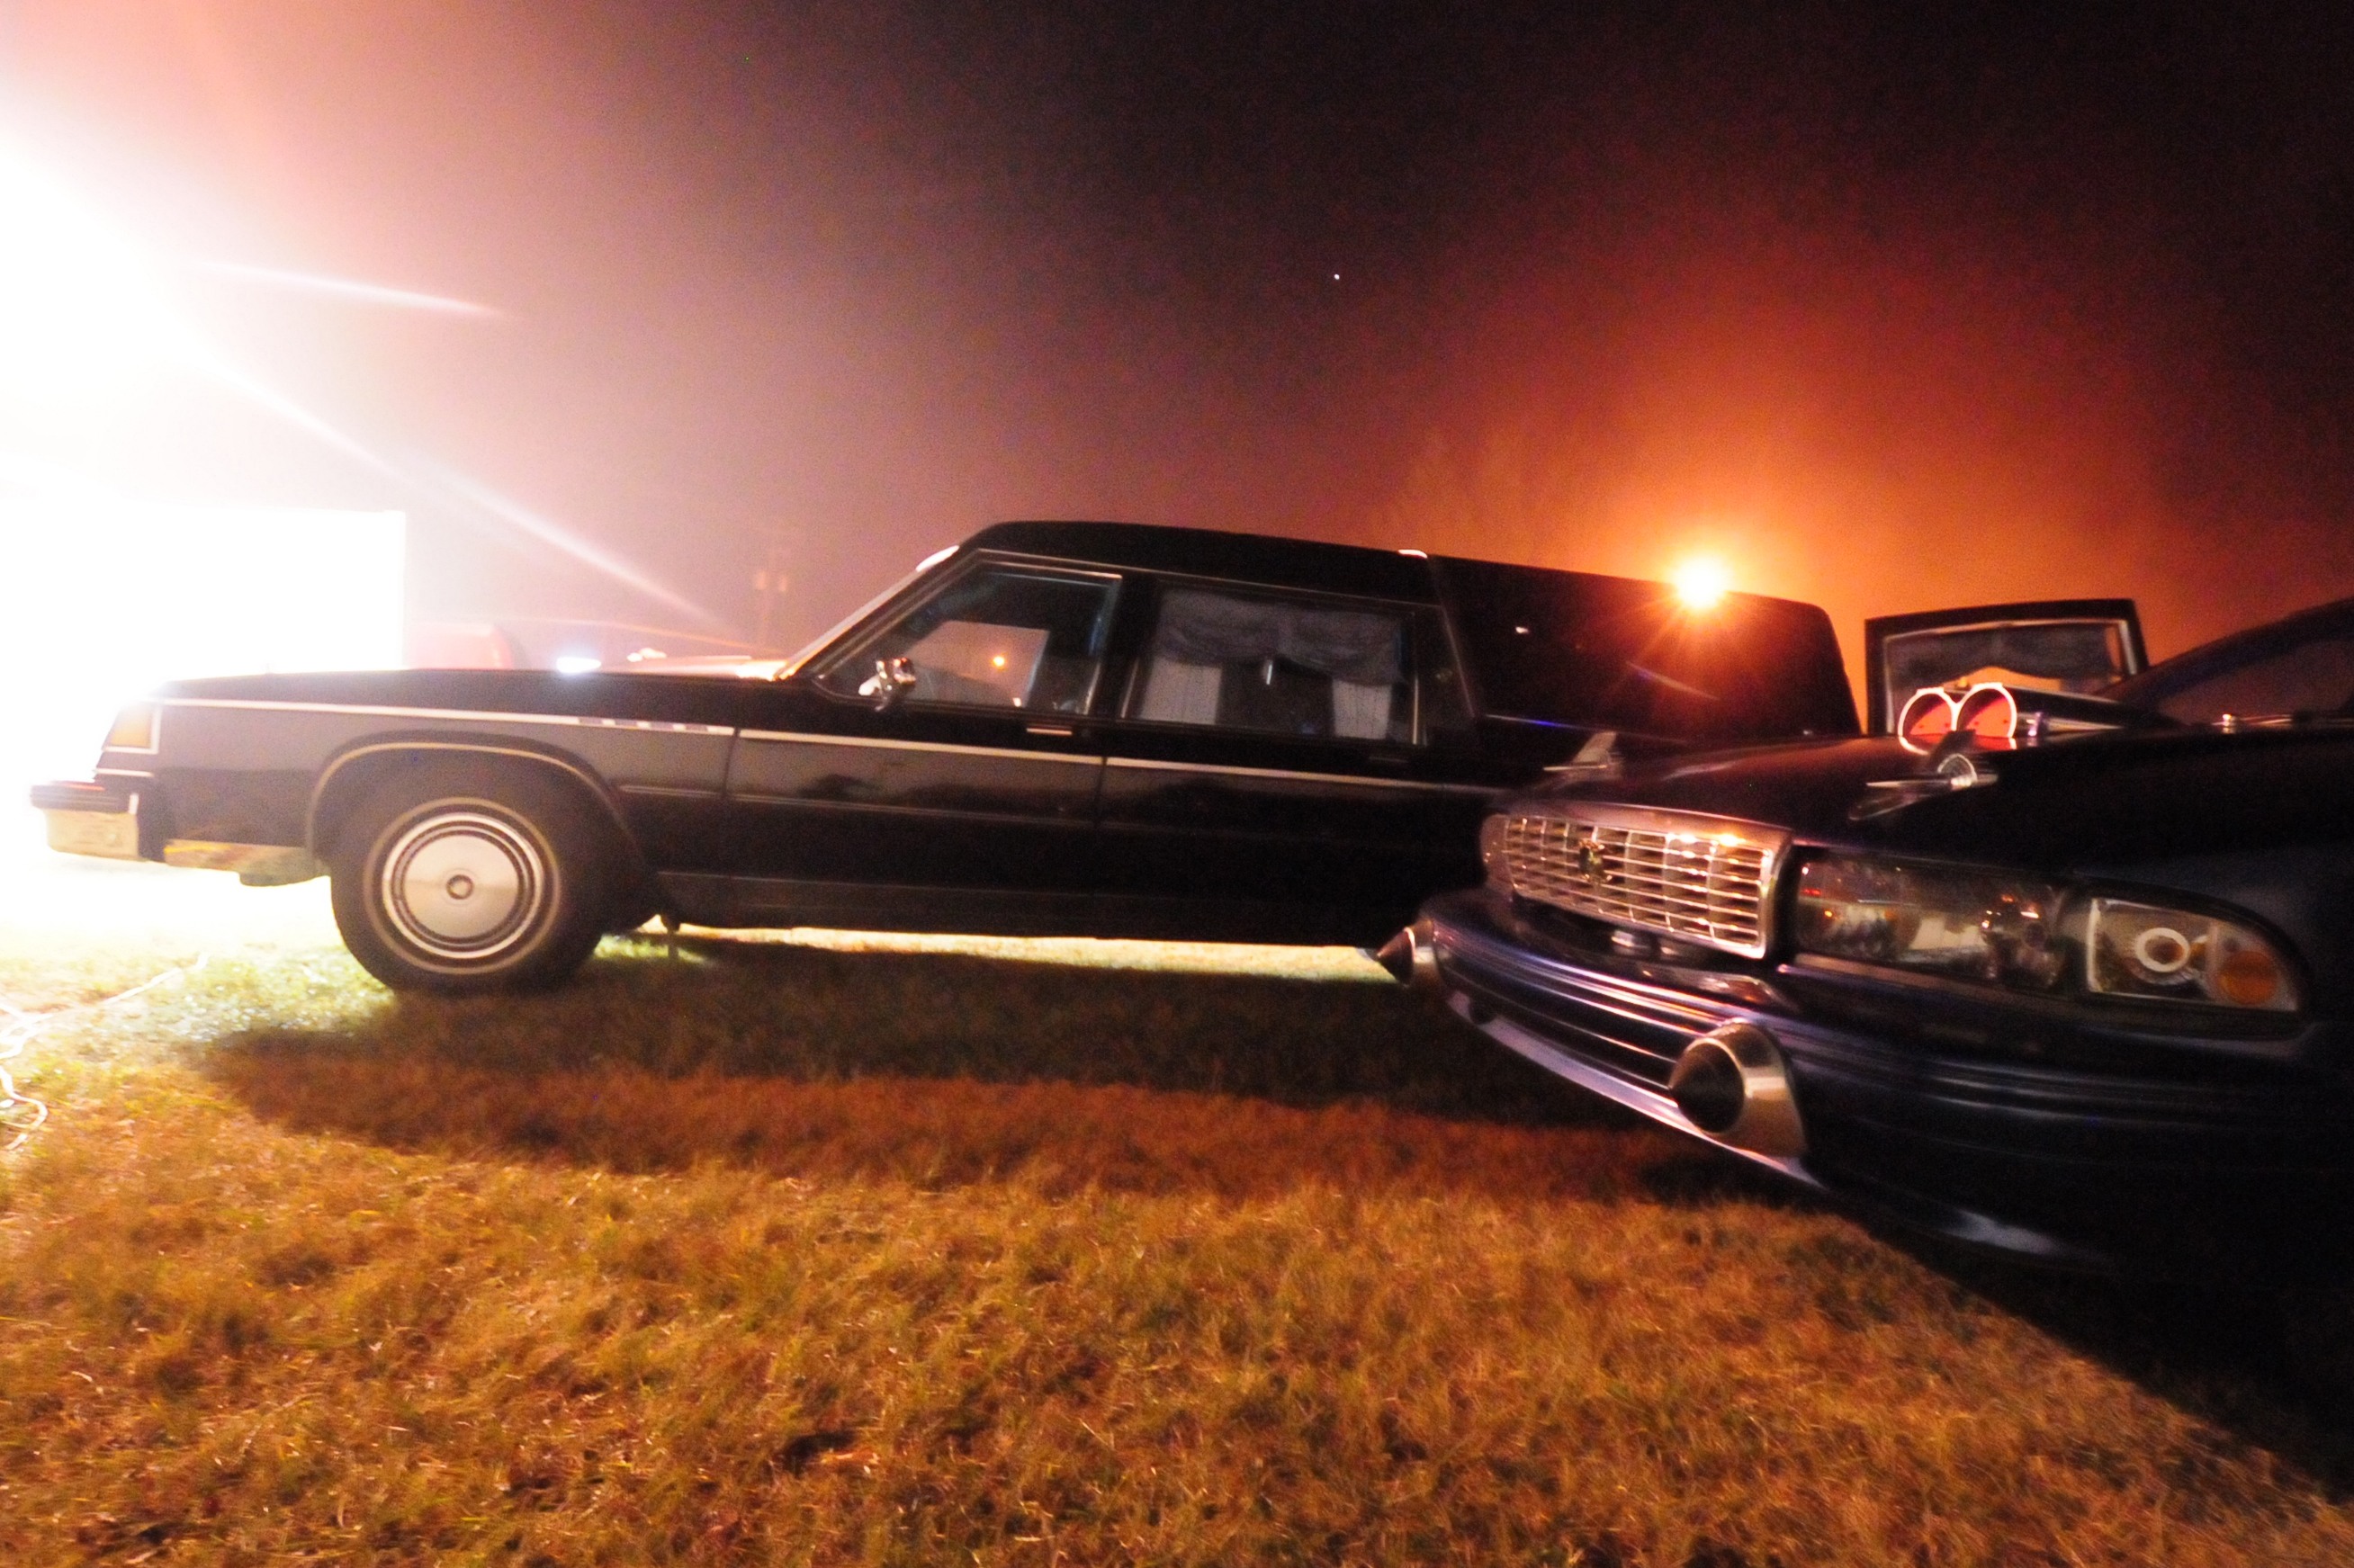 HALLOWEEN RIDES- A parade of hearse took place at the Zed 99 haunted house recently in support of the Boys and Girls Club of Red Deer.